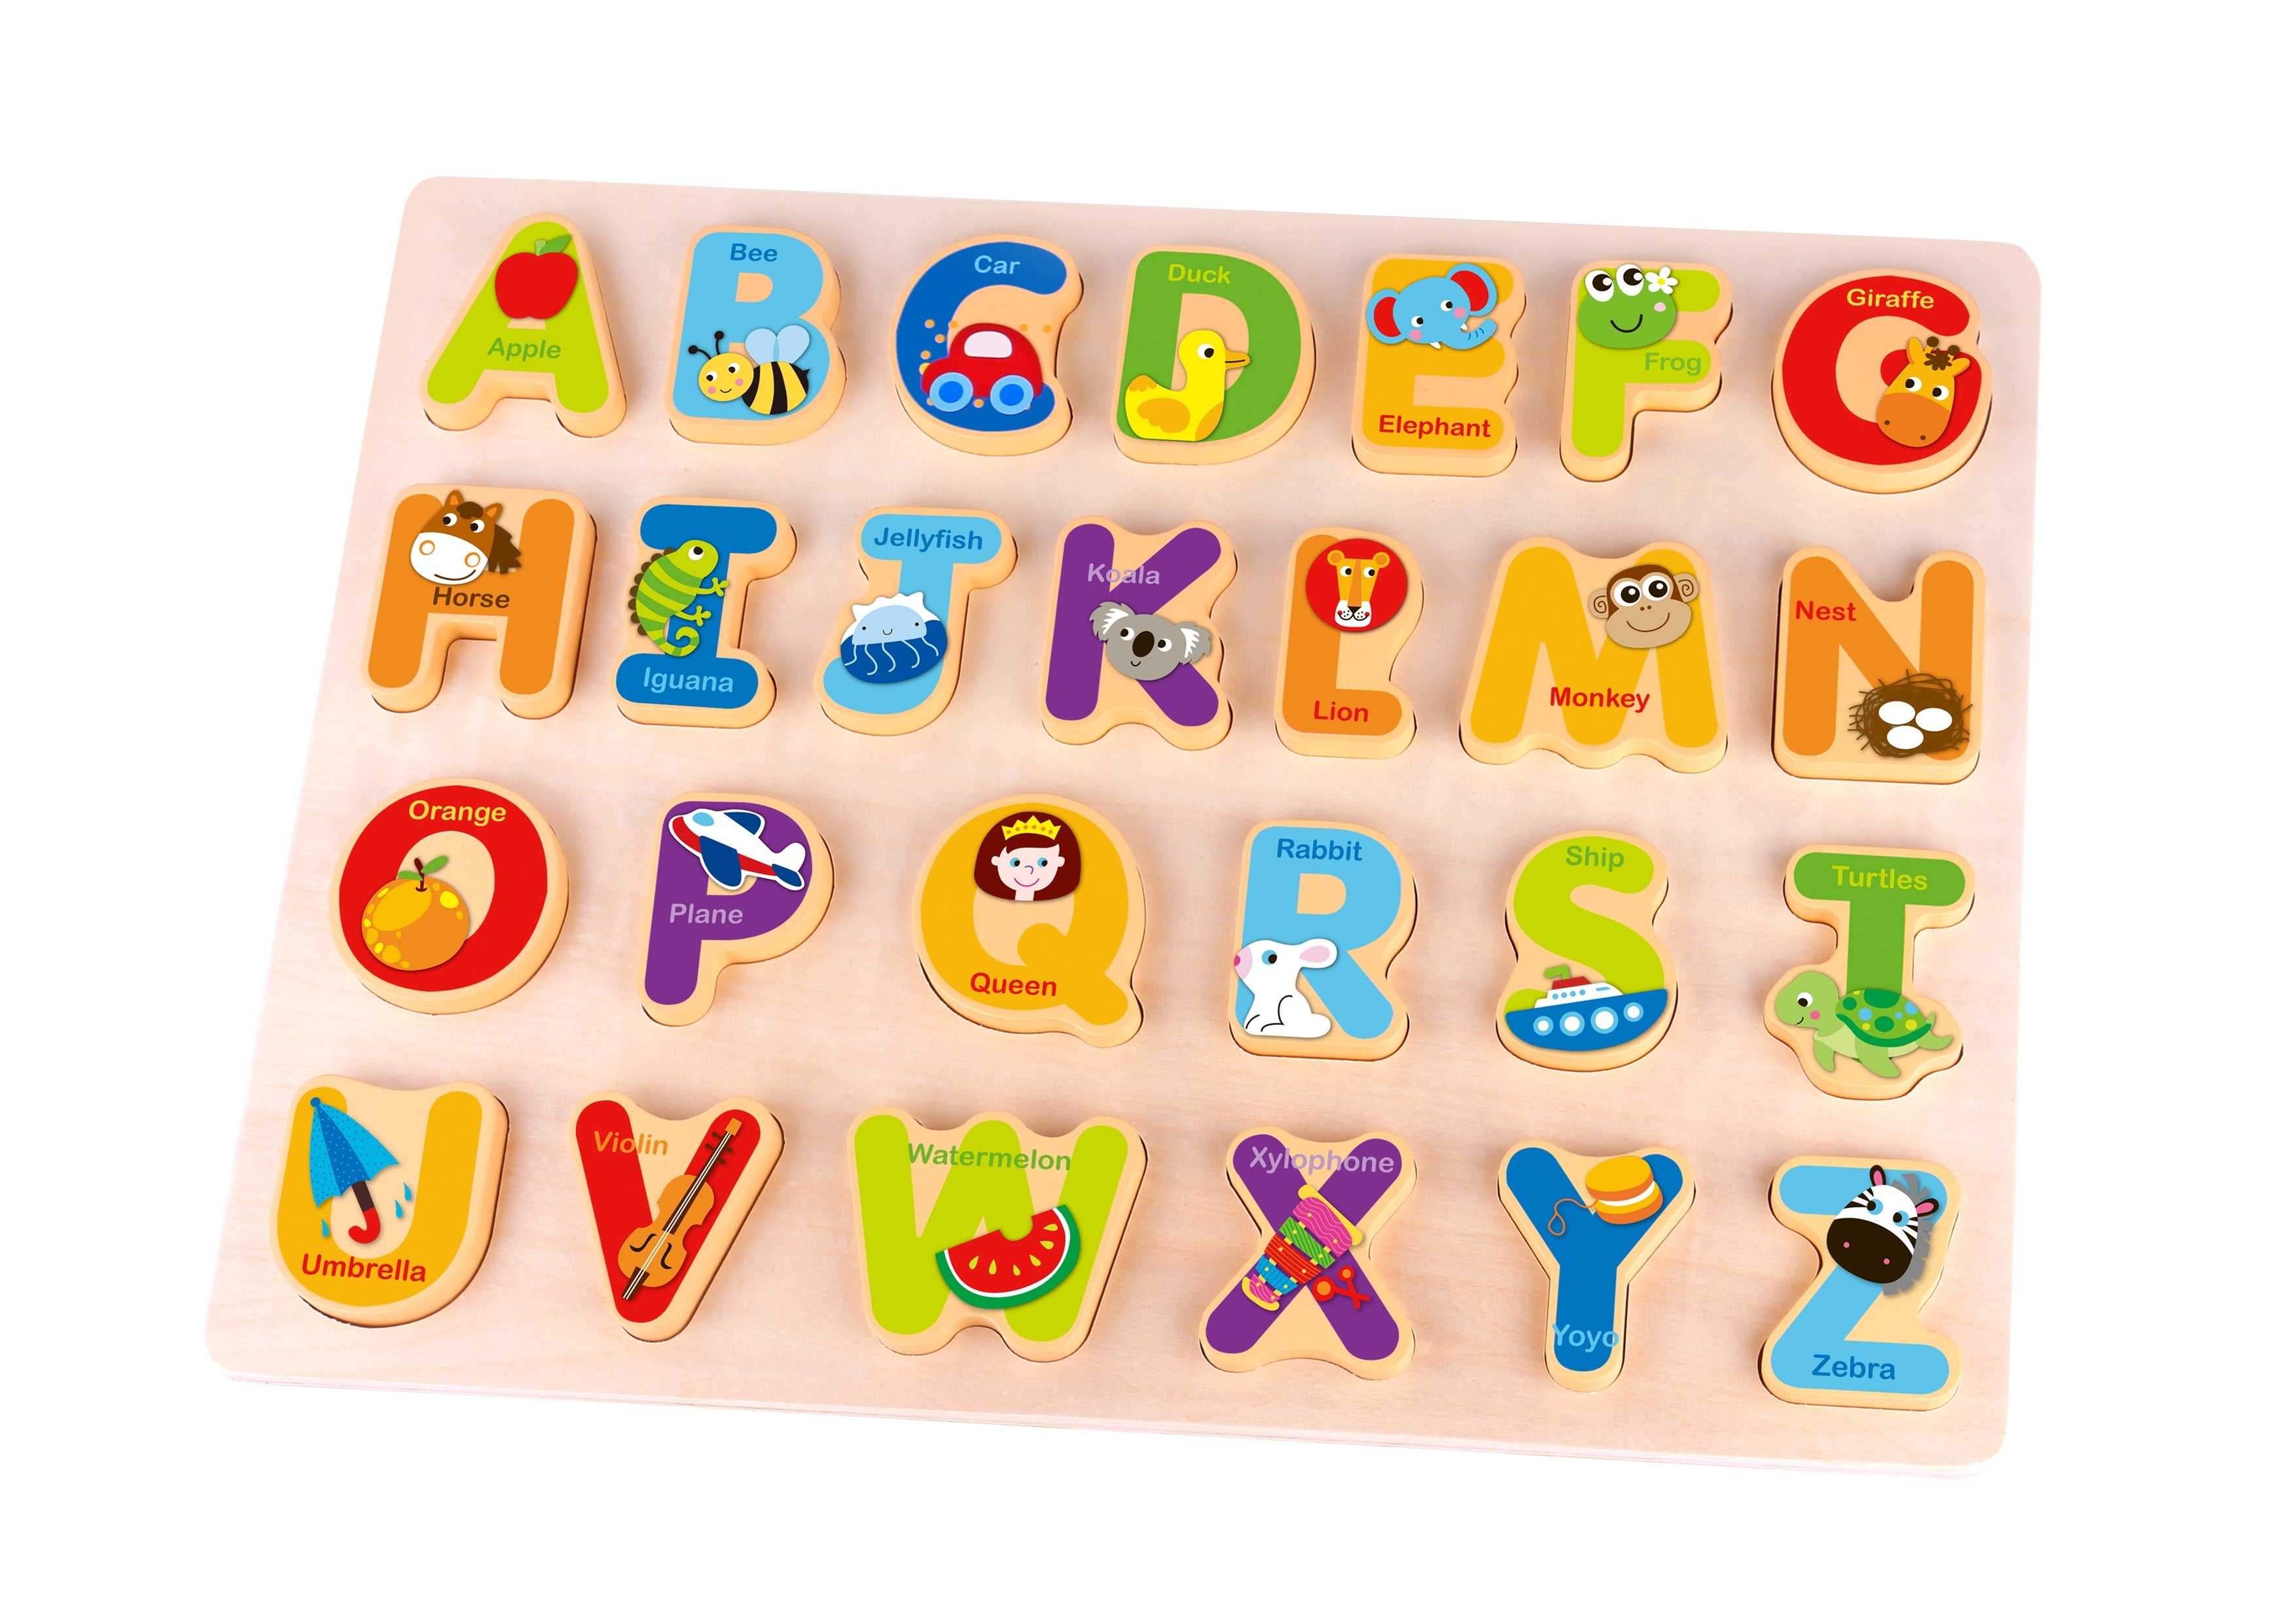 Toyster’s Wooden Letters and Illustrative Adventure Learning Puzzle